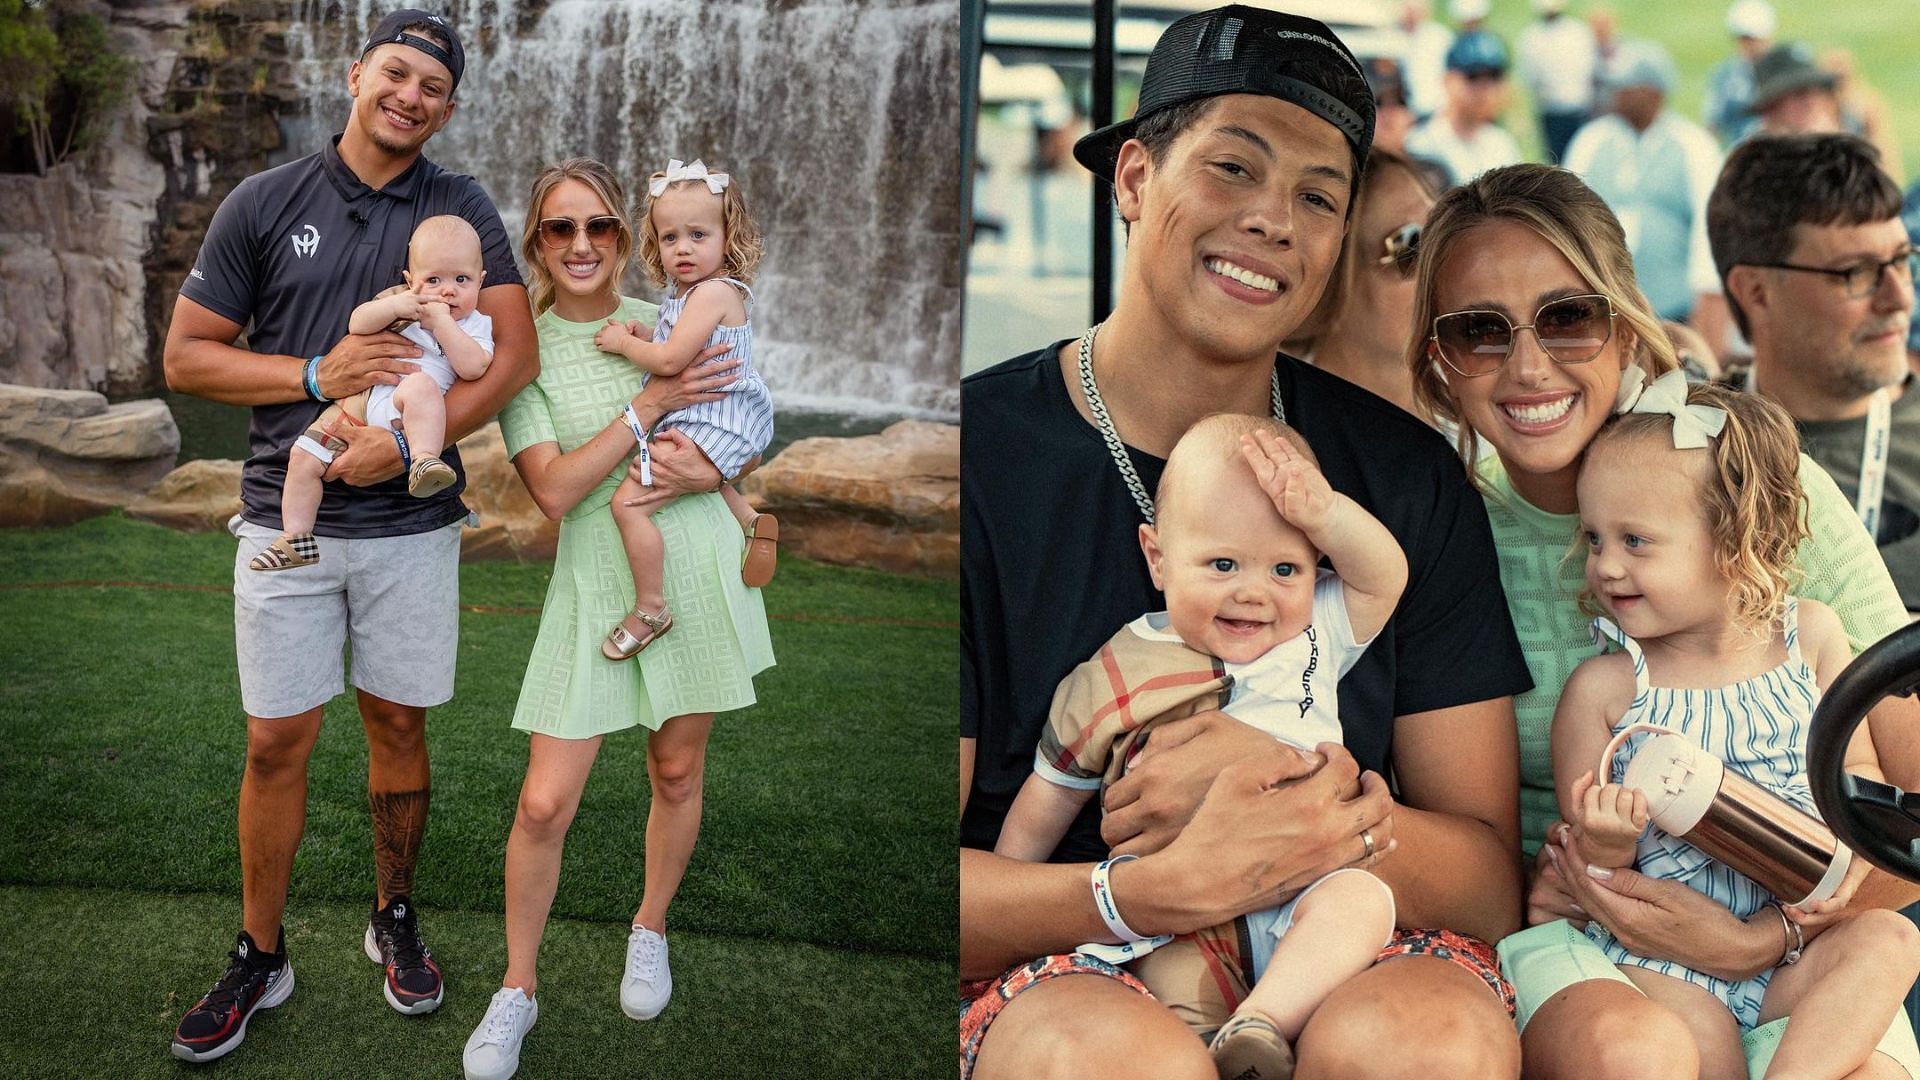 Brittany and Jackson Mahomes showed support to Kansas City Chiefs quarterback Patrick Mahomes, who competed in the latest edition of &quot;The Match&quot; charity golf tournament. (Image credit: Brittany Mahomes/Instagram) 